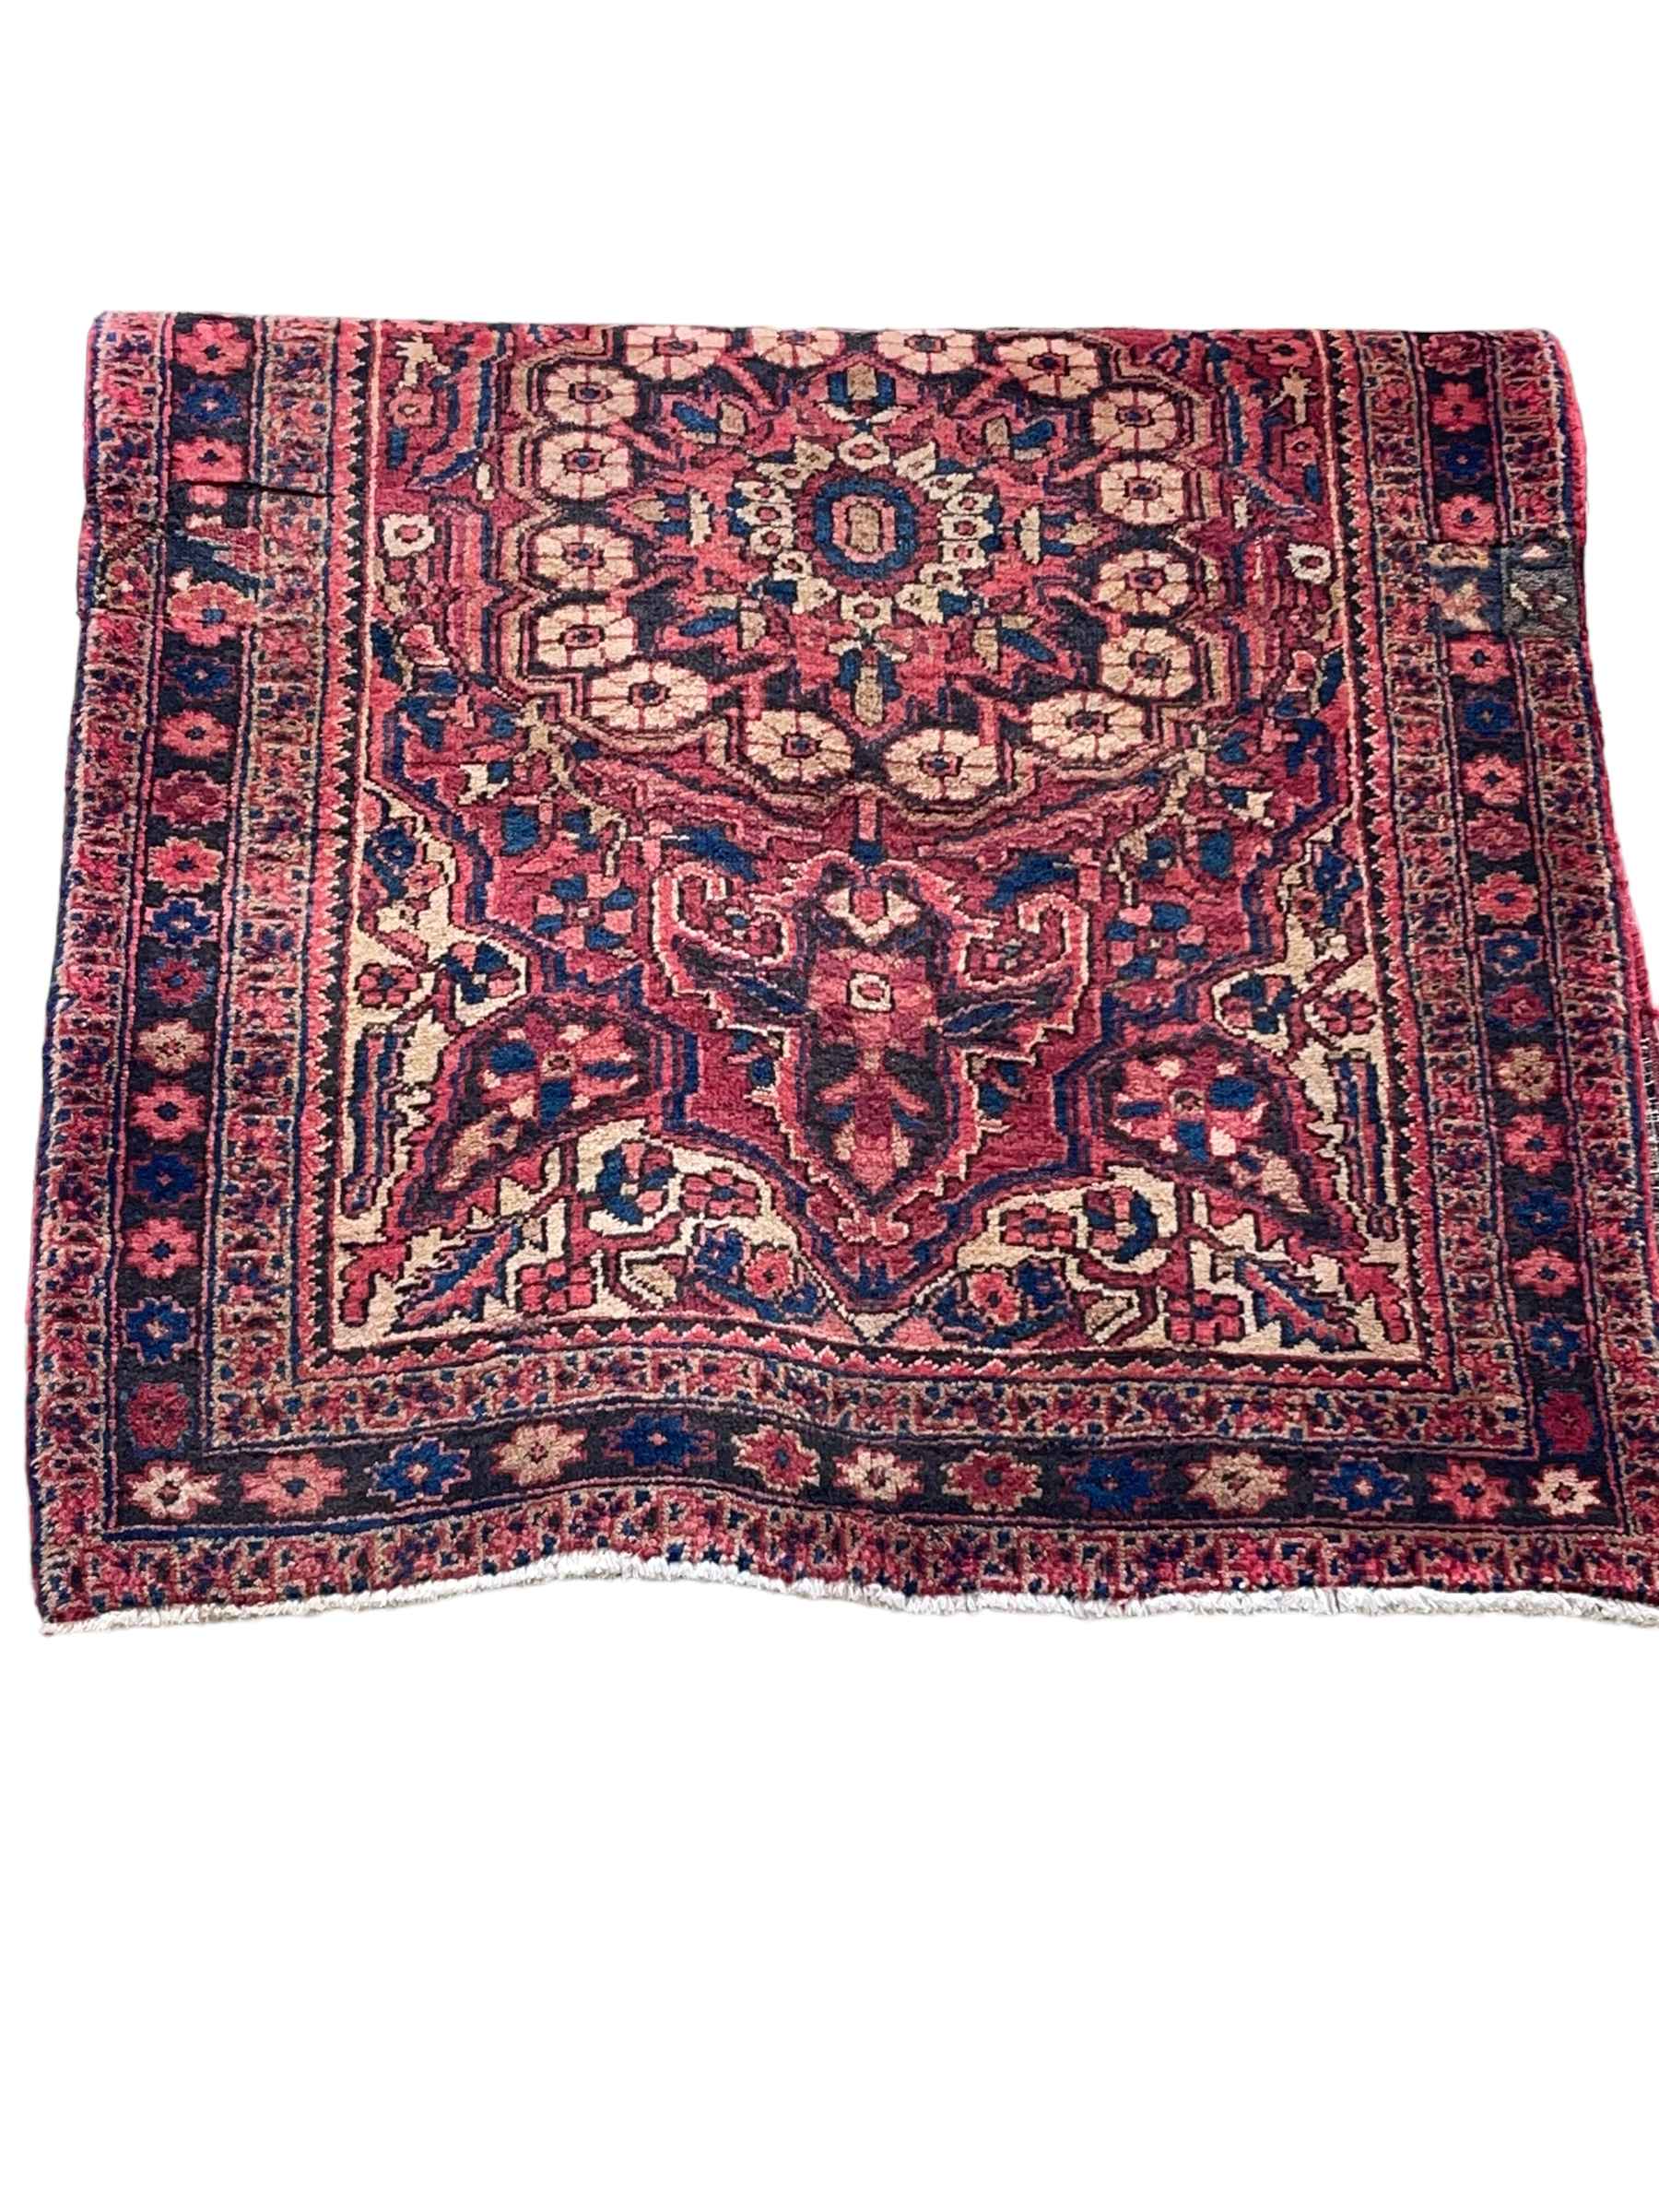 Mid Century hand knotted Persian Heriz carpet 3.40 by 1.22.